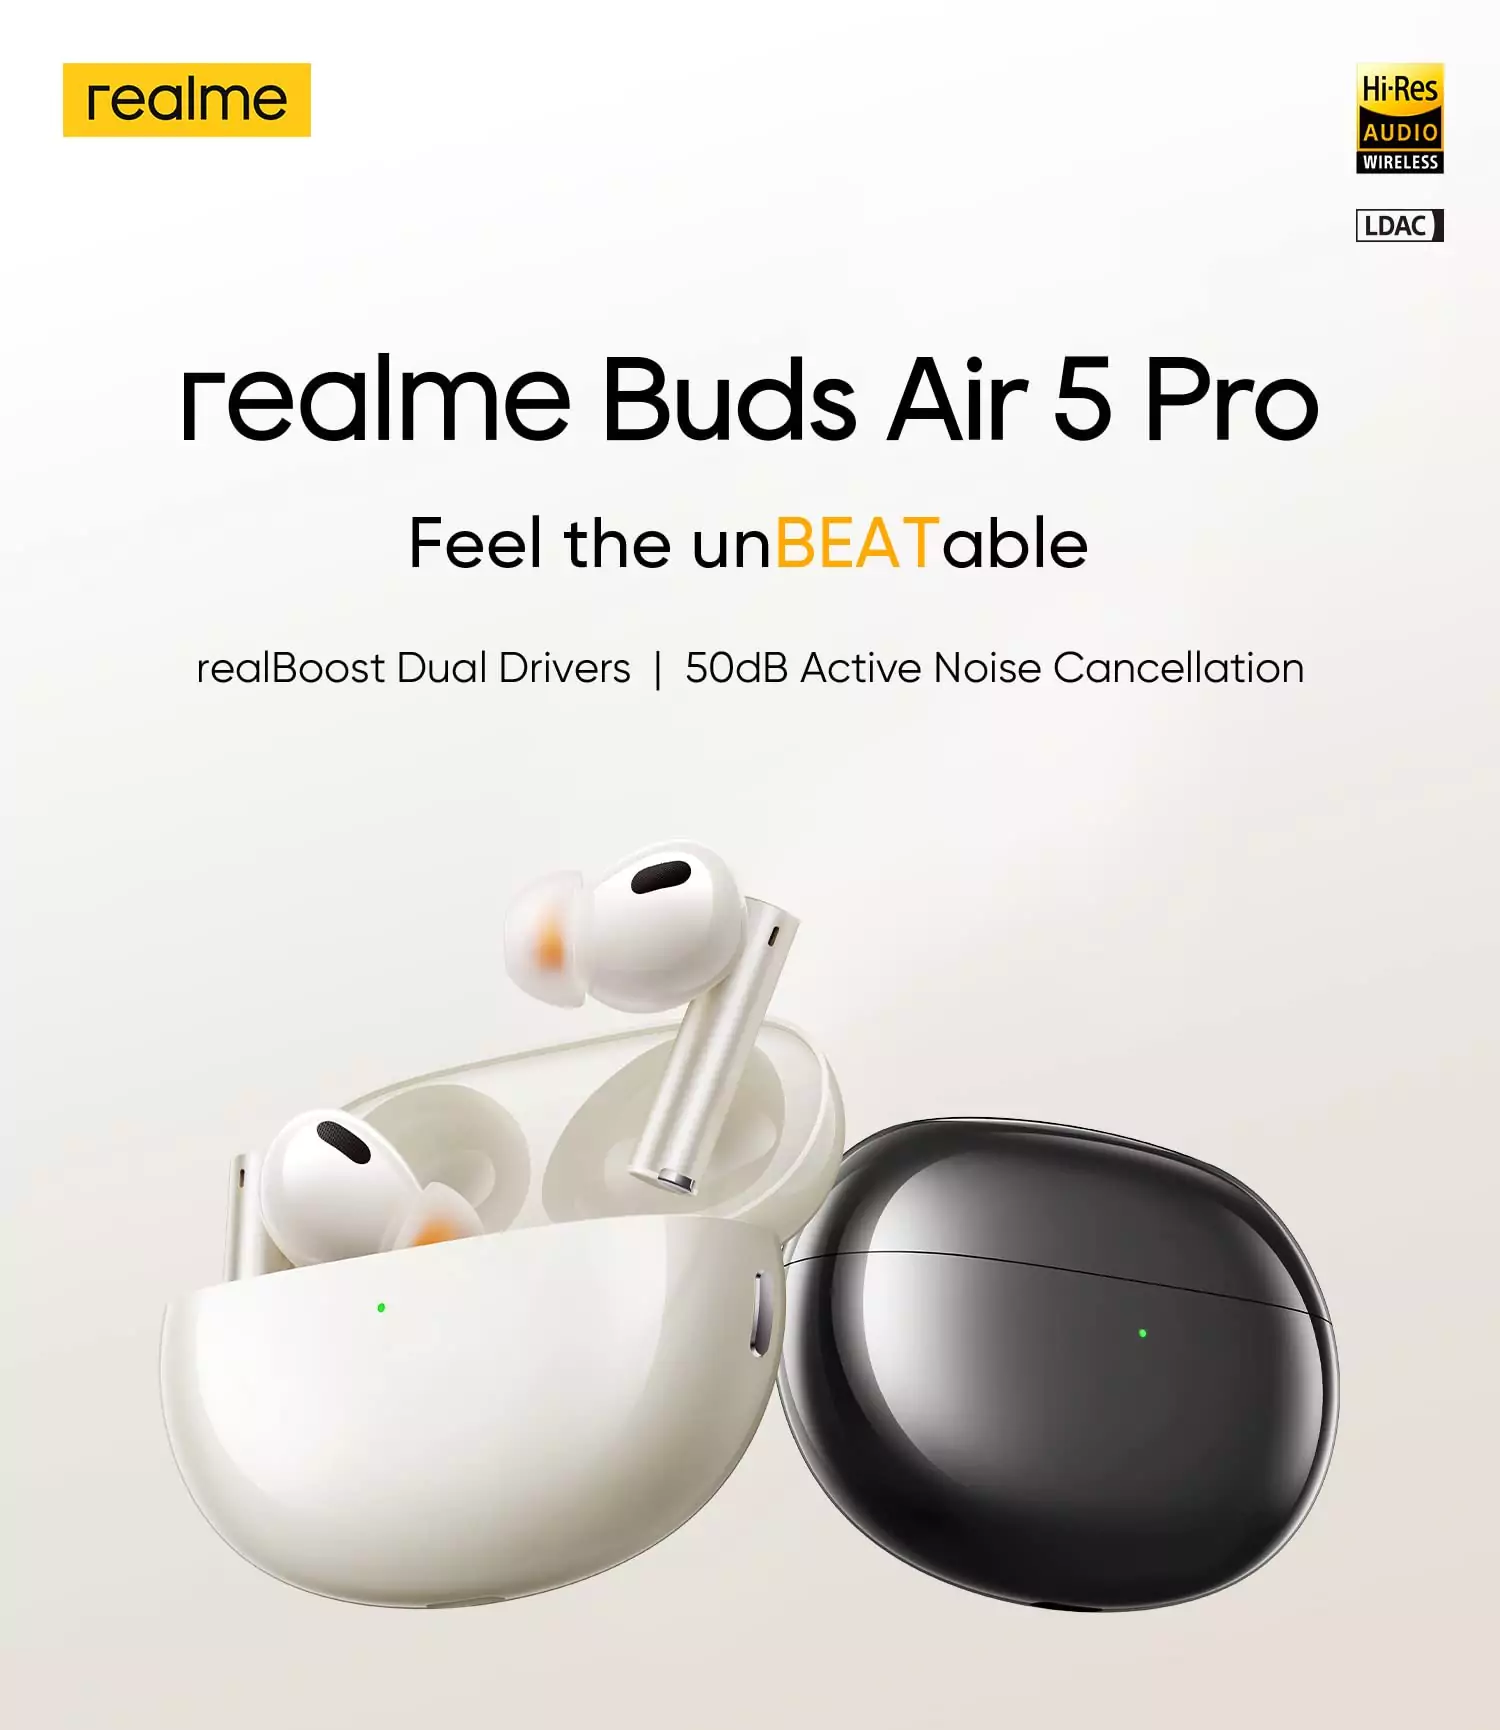 realme Buds Air 5 Pro Wireless Headphones, realBoost Dual Drivers, Up to 40  Hours of Playback, 50dB Active Noise Cancellation, 360deg Spatial Audio  Effect - (Black) 